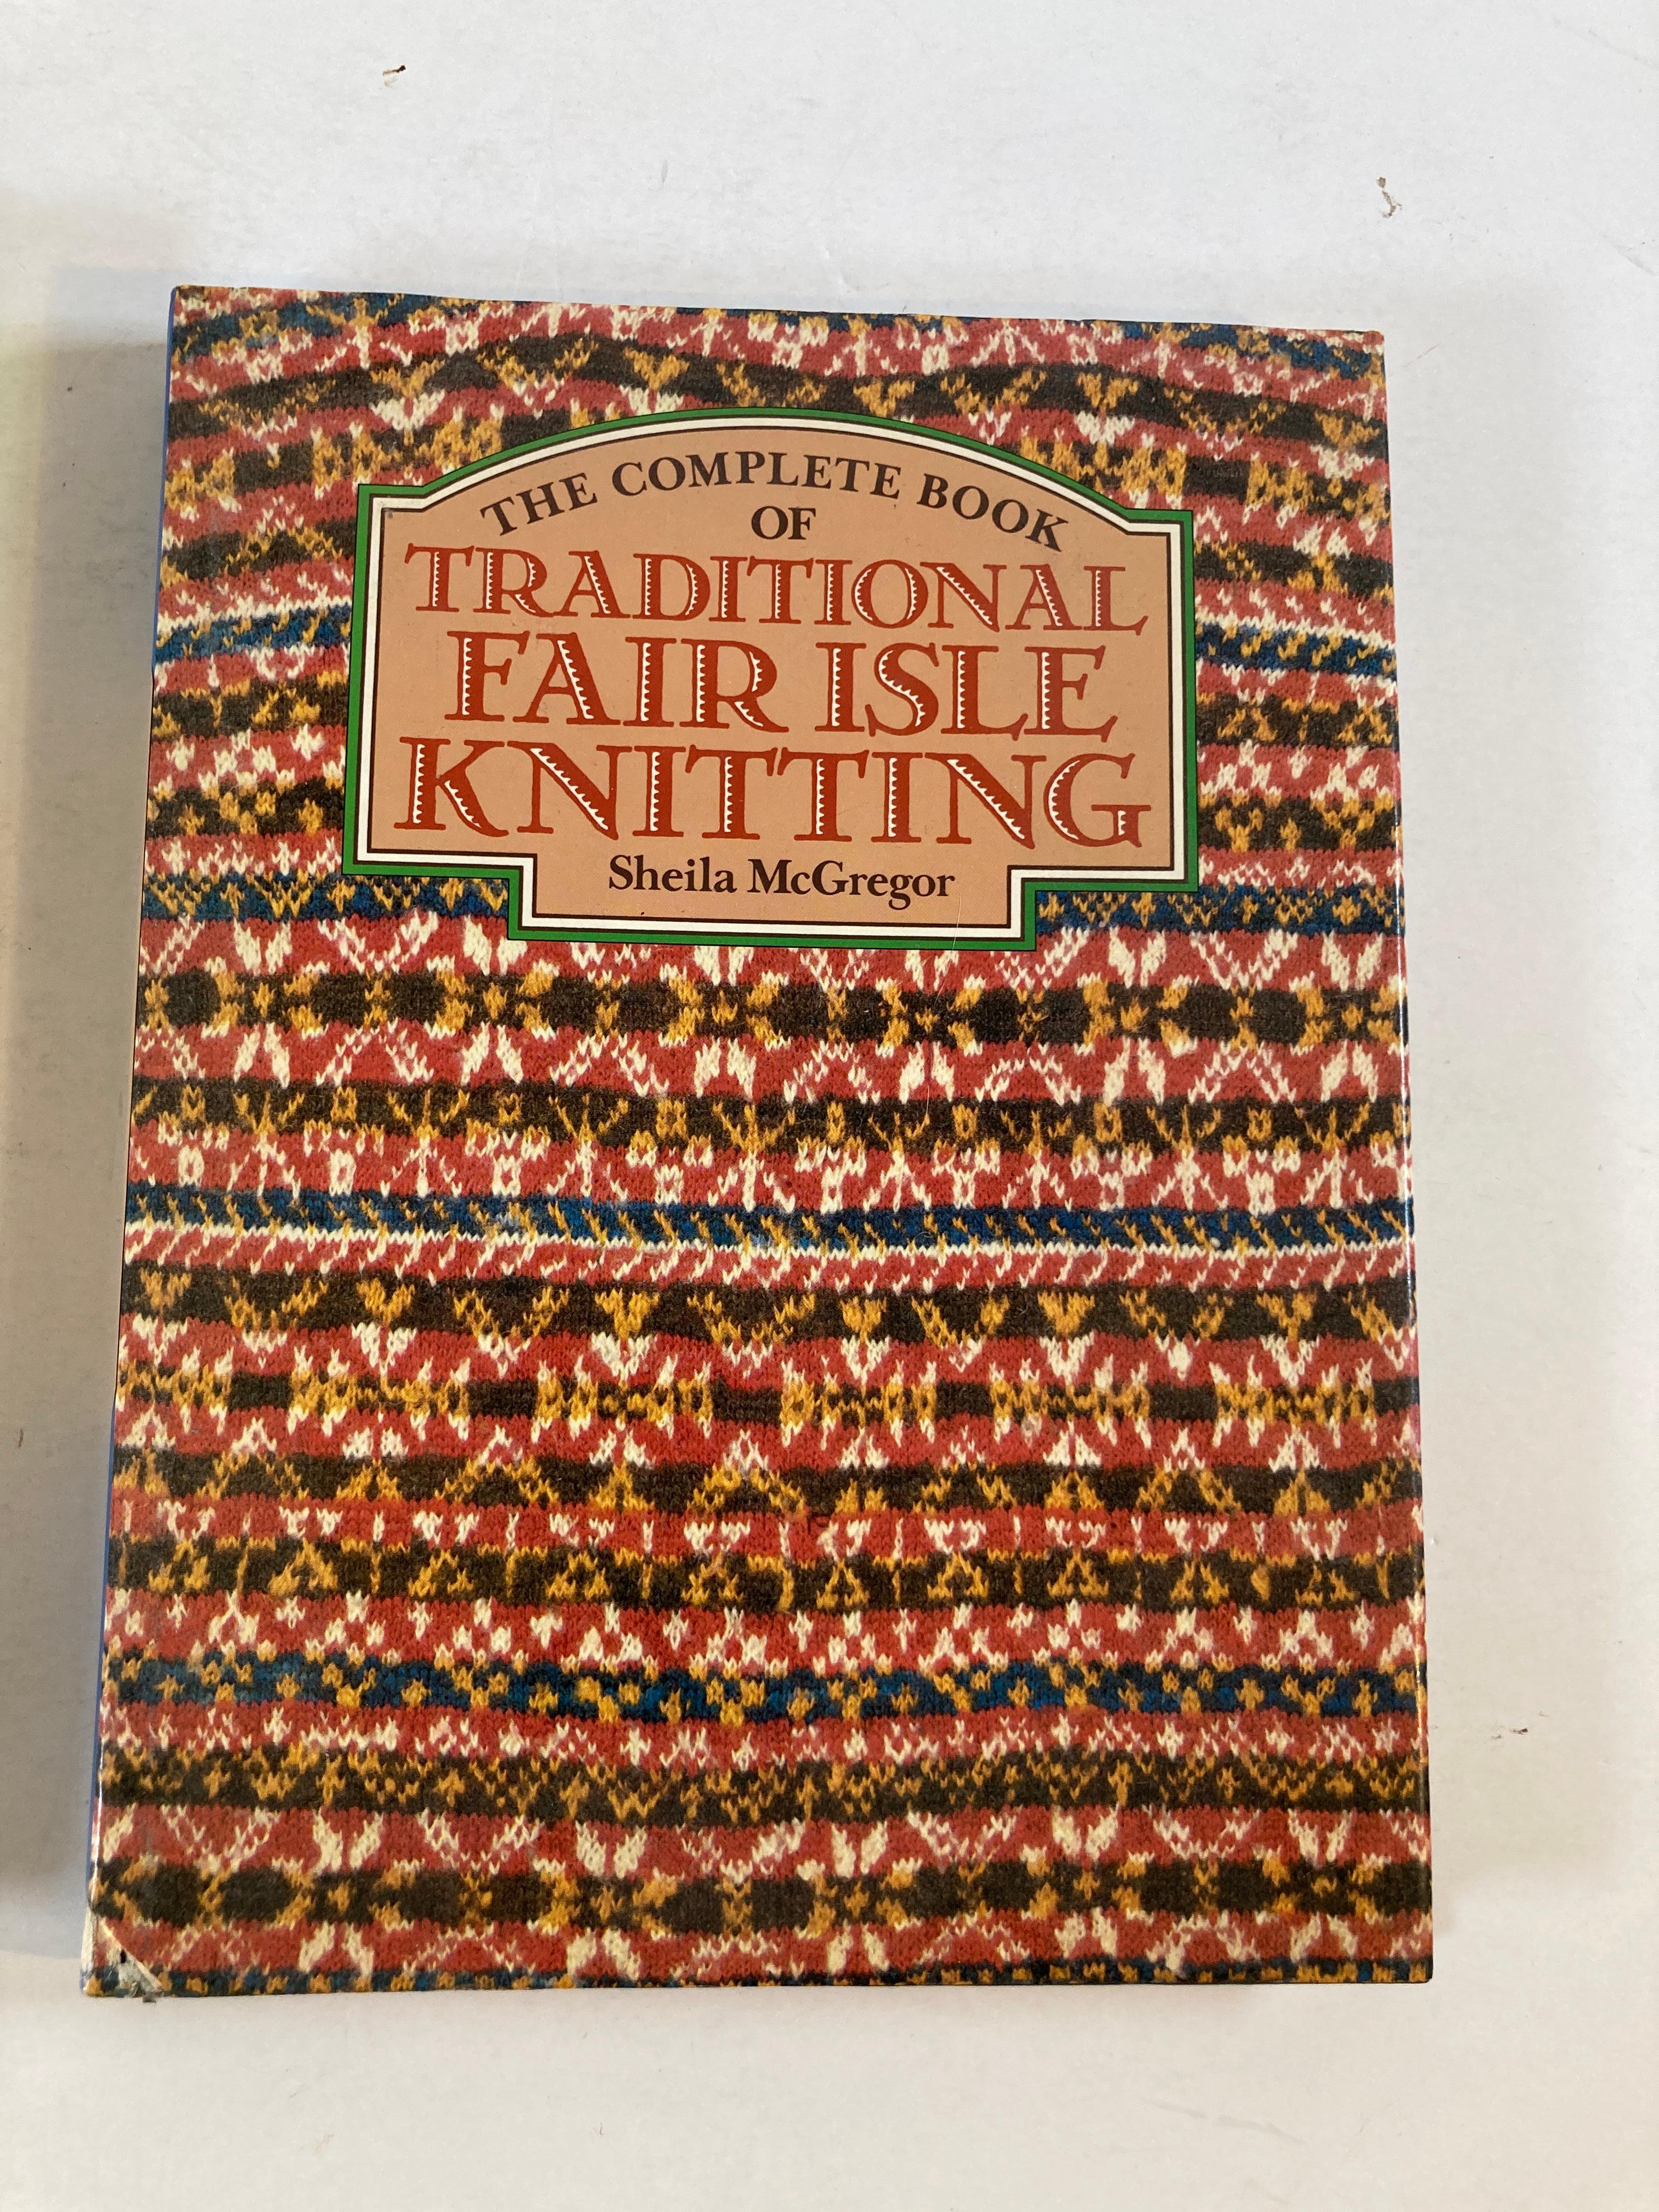 The Complete Book Of Traditional Fair Isle Knitting By McGregor, Sheila.
1st Edition Published 1982
Title The Complete Book of Traditional Fair Isle Knitting
Author McGregor, Sheila
First Printing; Hardcover
Book Condition Used Good+ dust